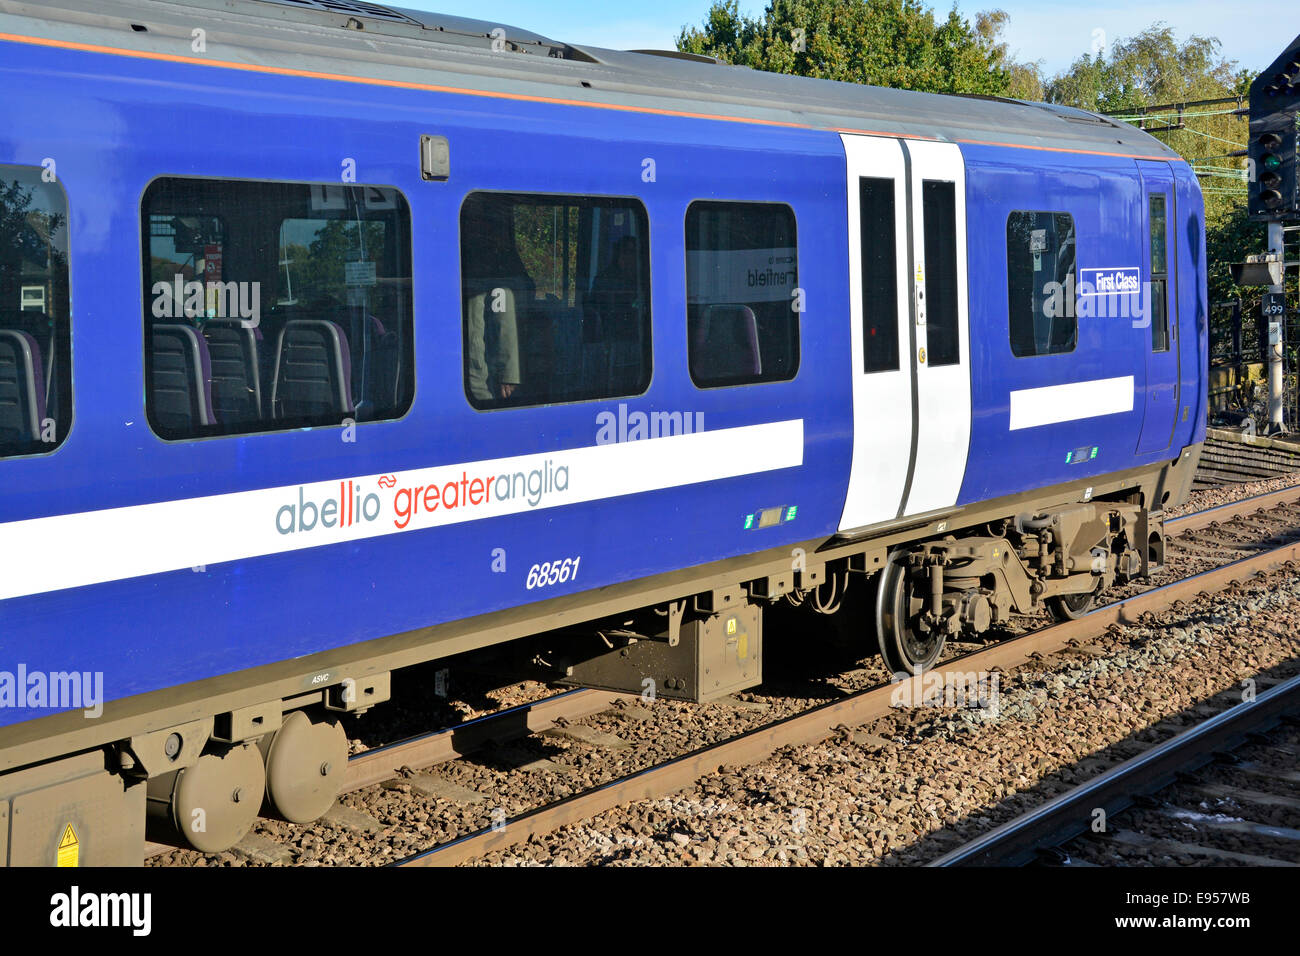 Abellio Greater Anglia brand name on railway carriage forming the front of a train departing Shenfield station Stock Photo